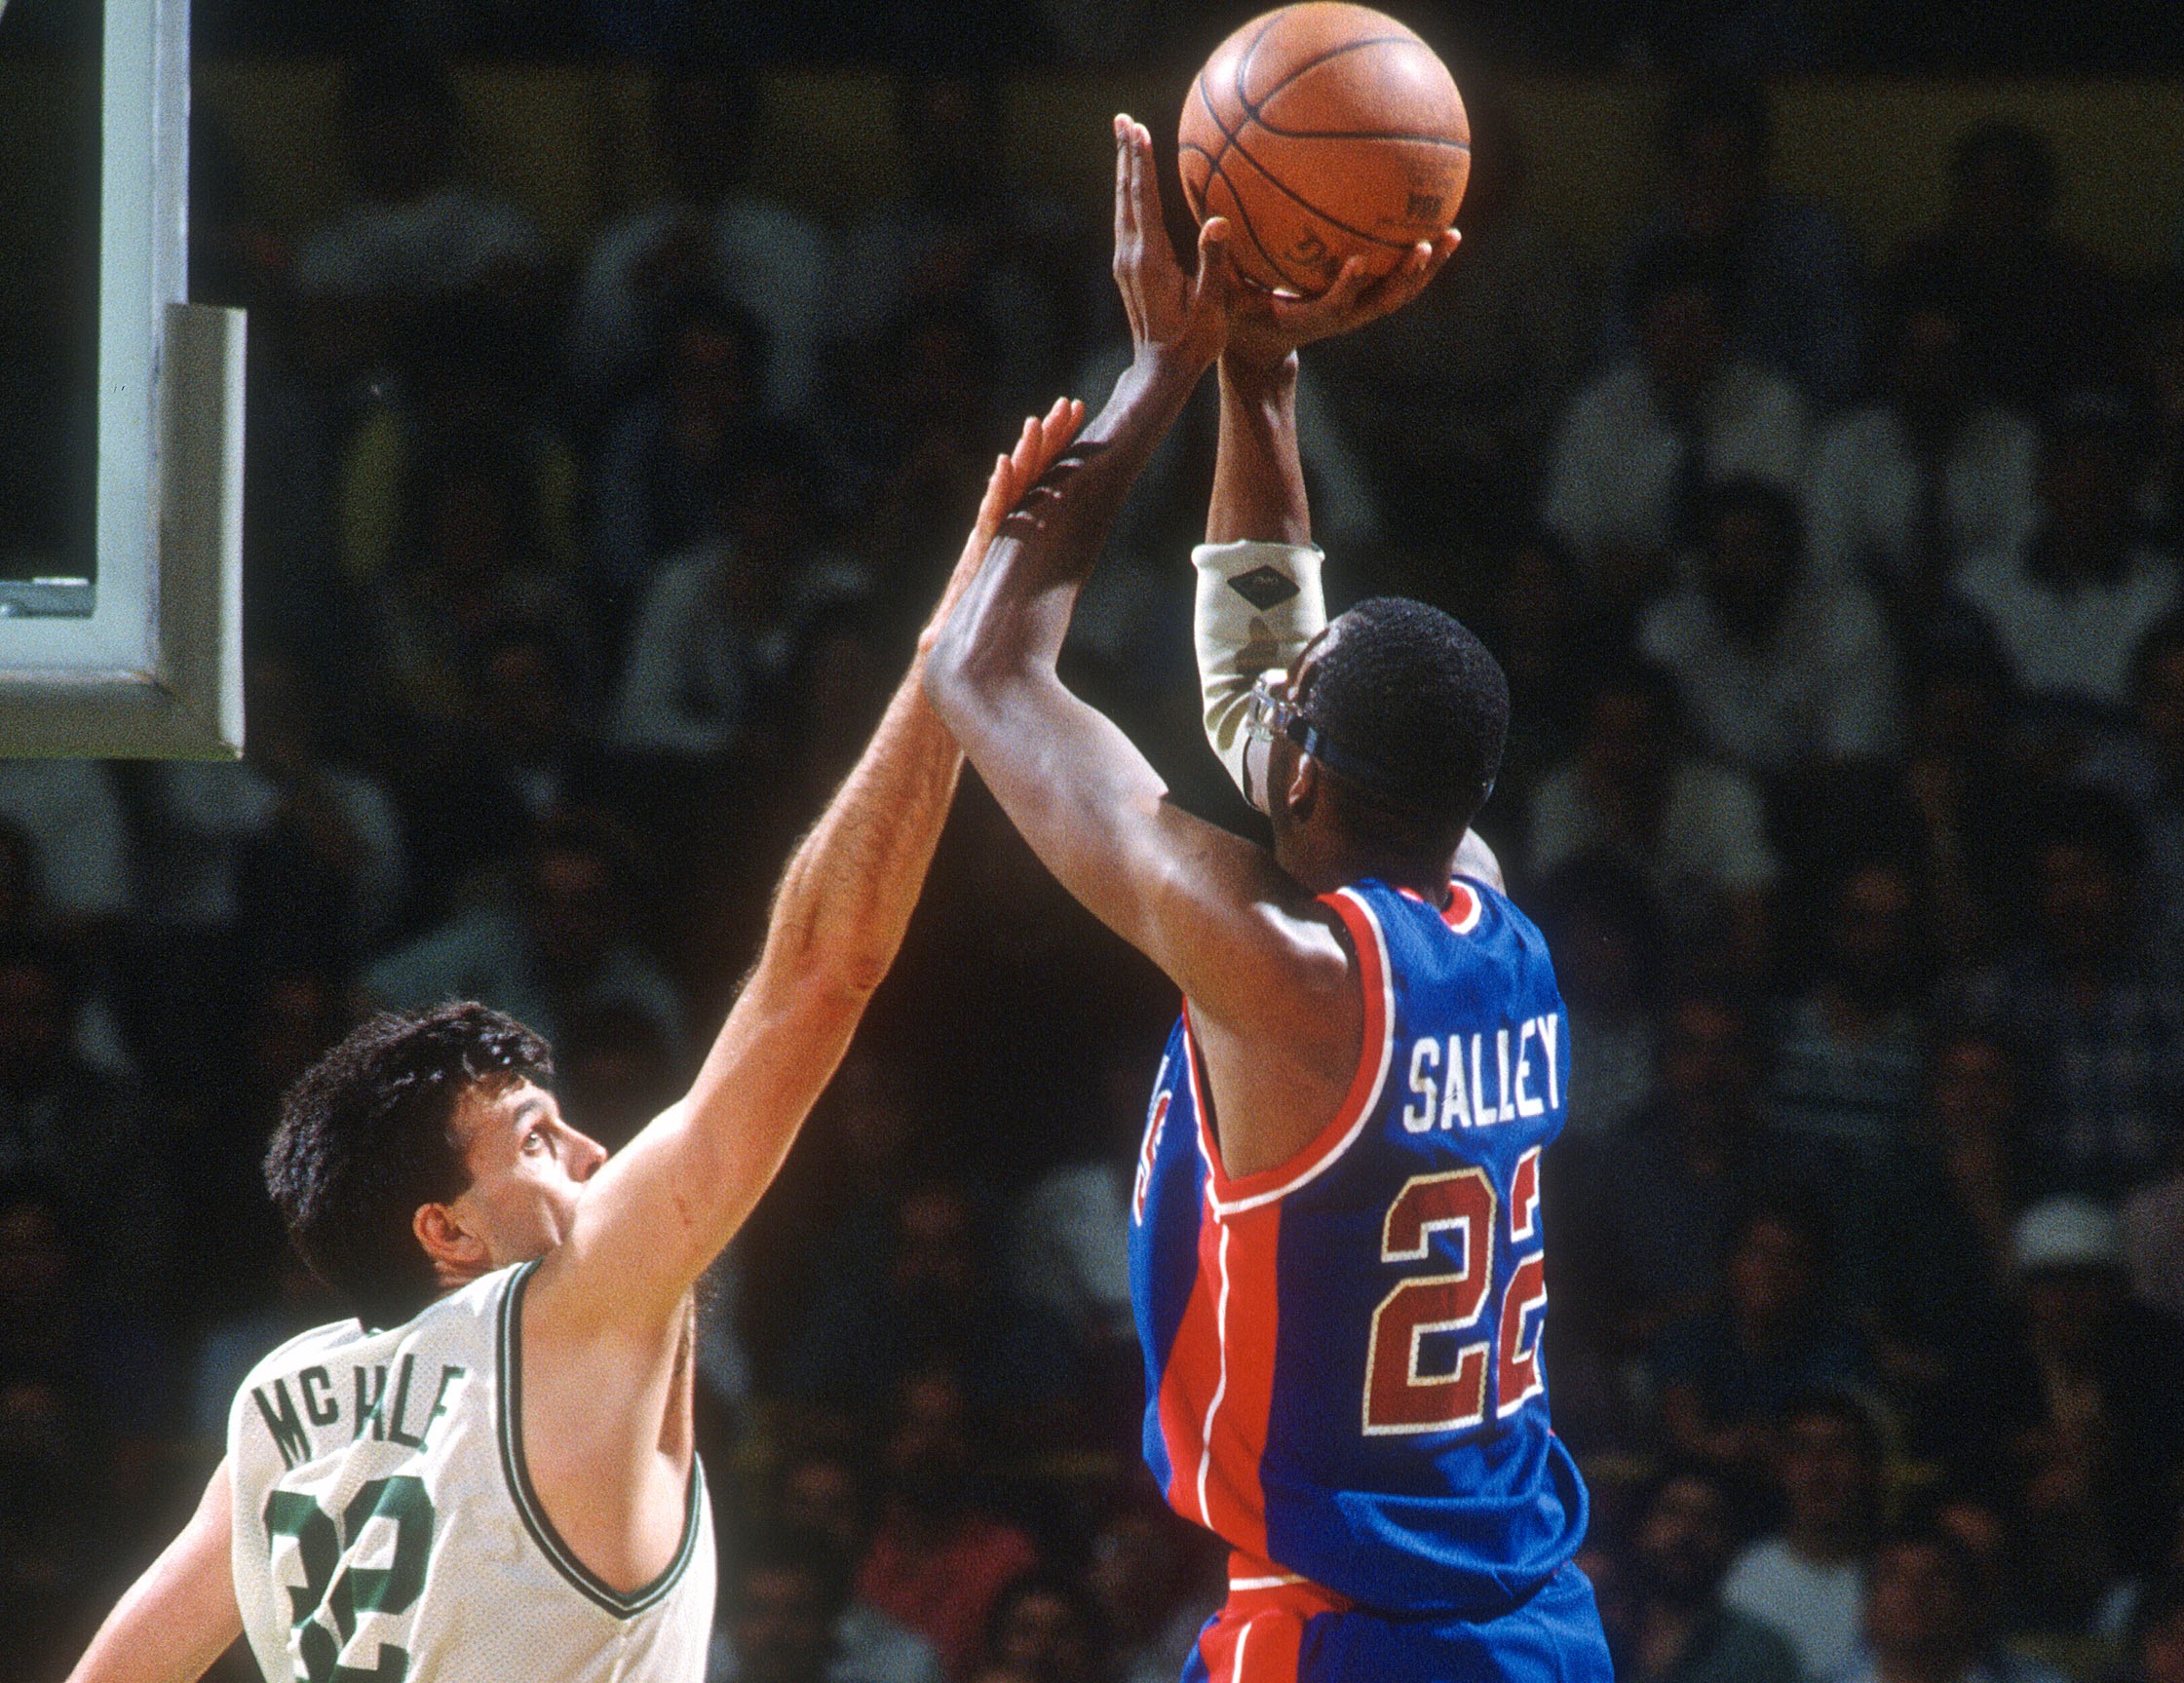 Kevin McHale of the Boston Celtics defends the shot of John Salley of the Detroit Pistons.